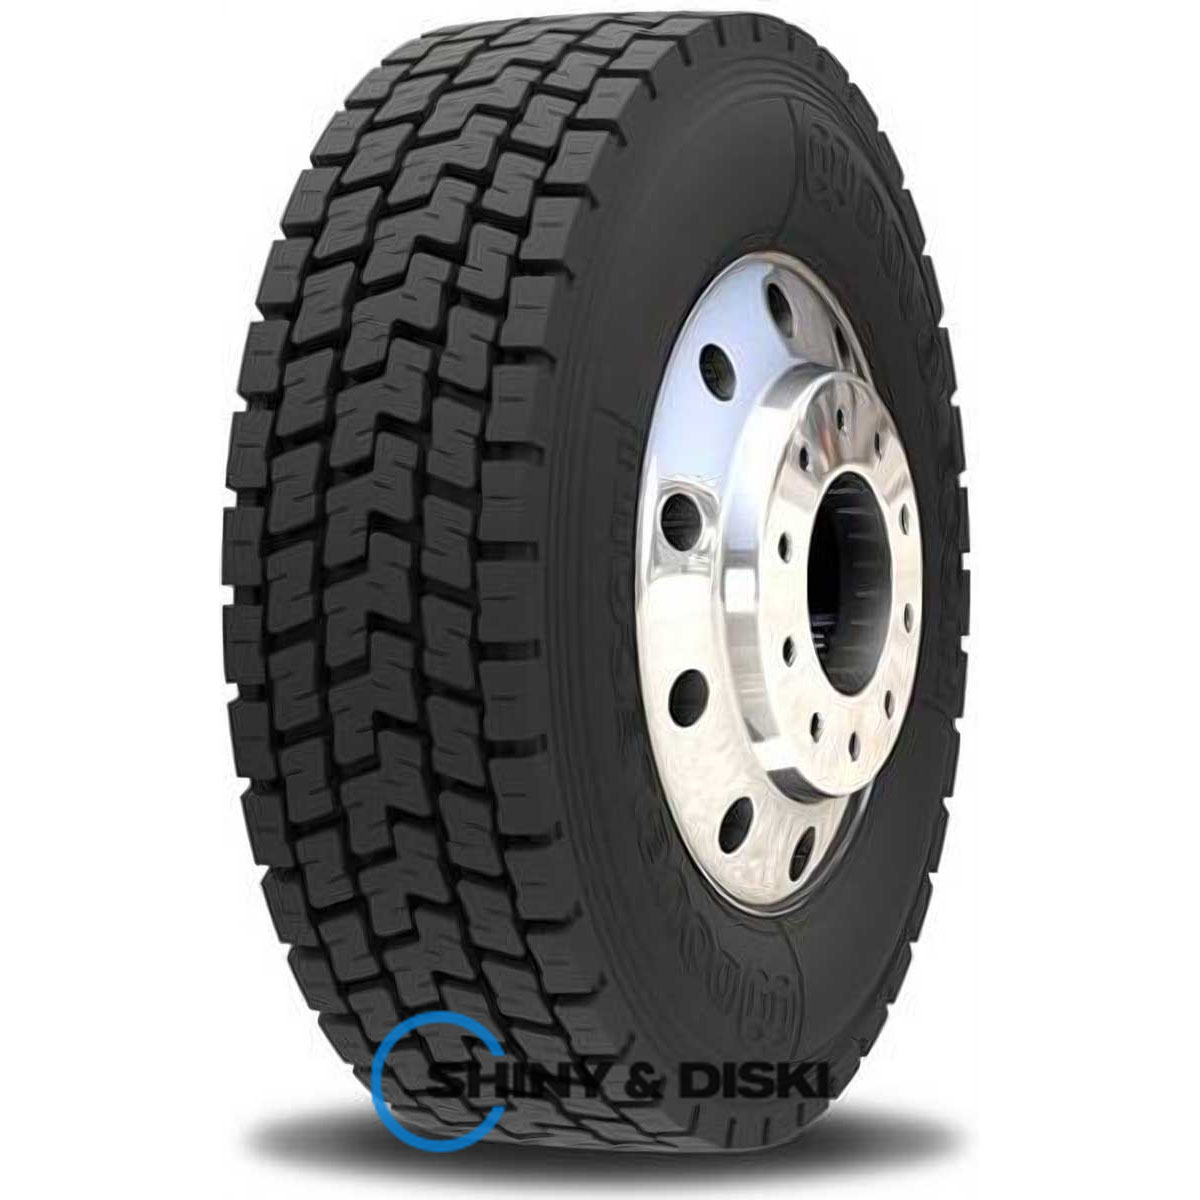 double coin rlb450 (ведущая ось) 315/80 r22.5 152/148m